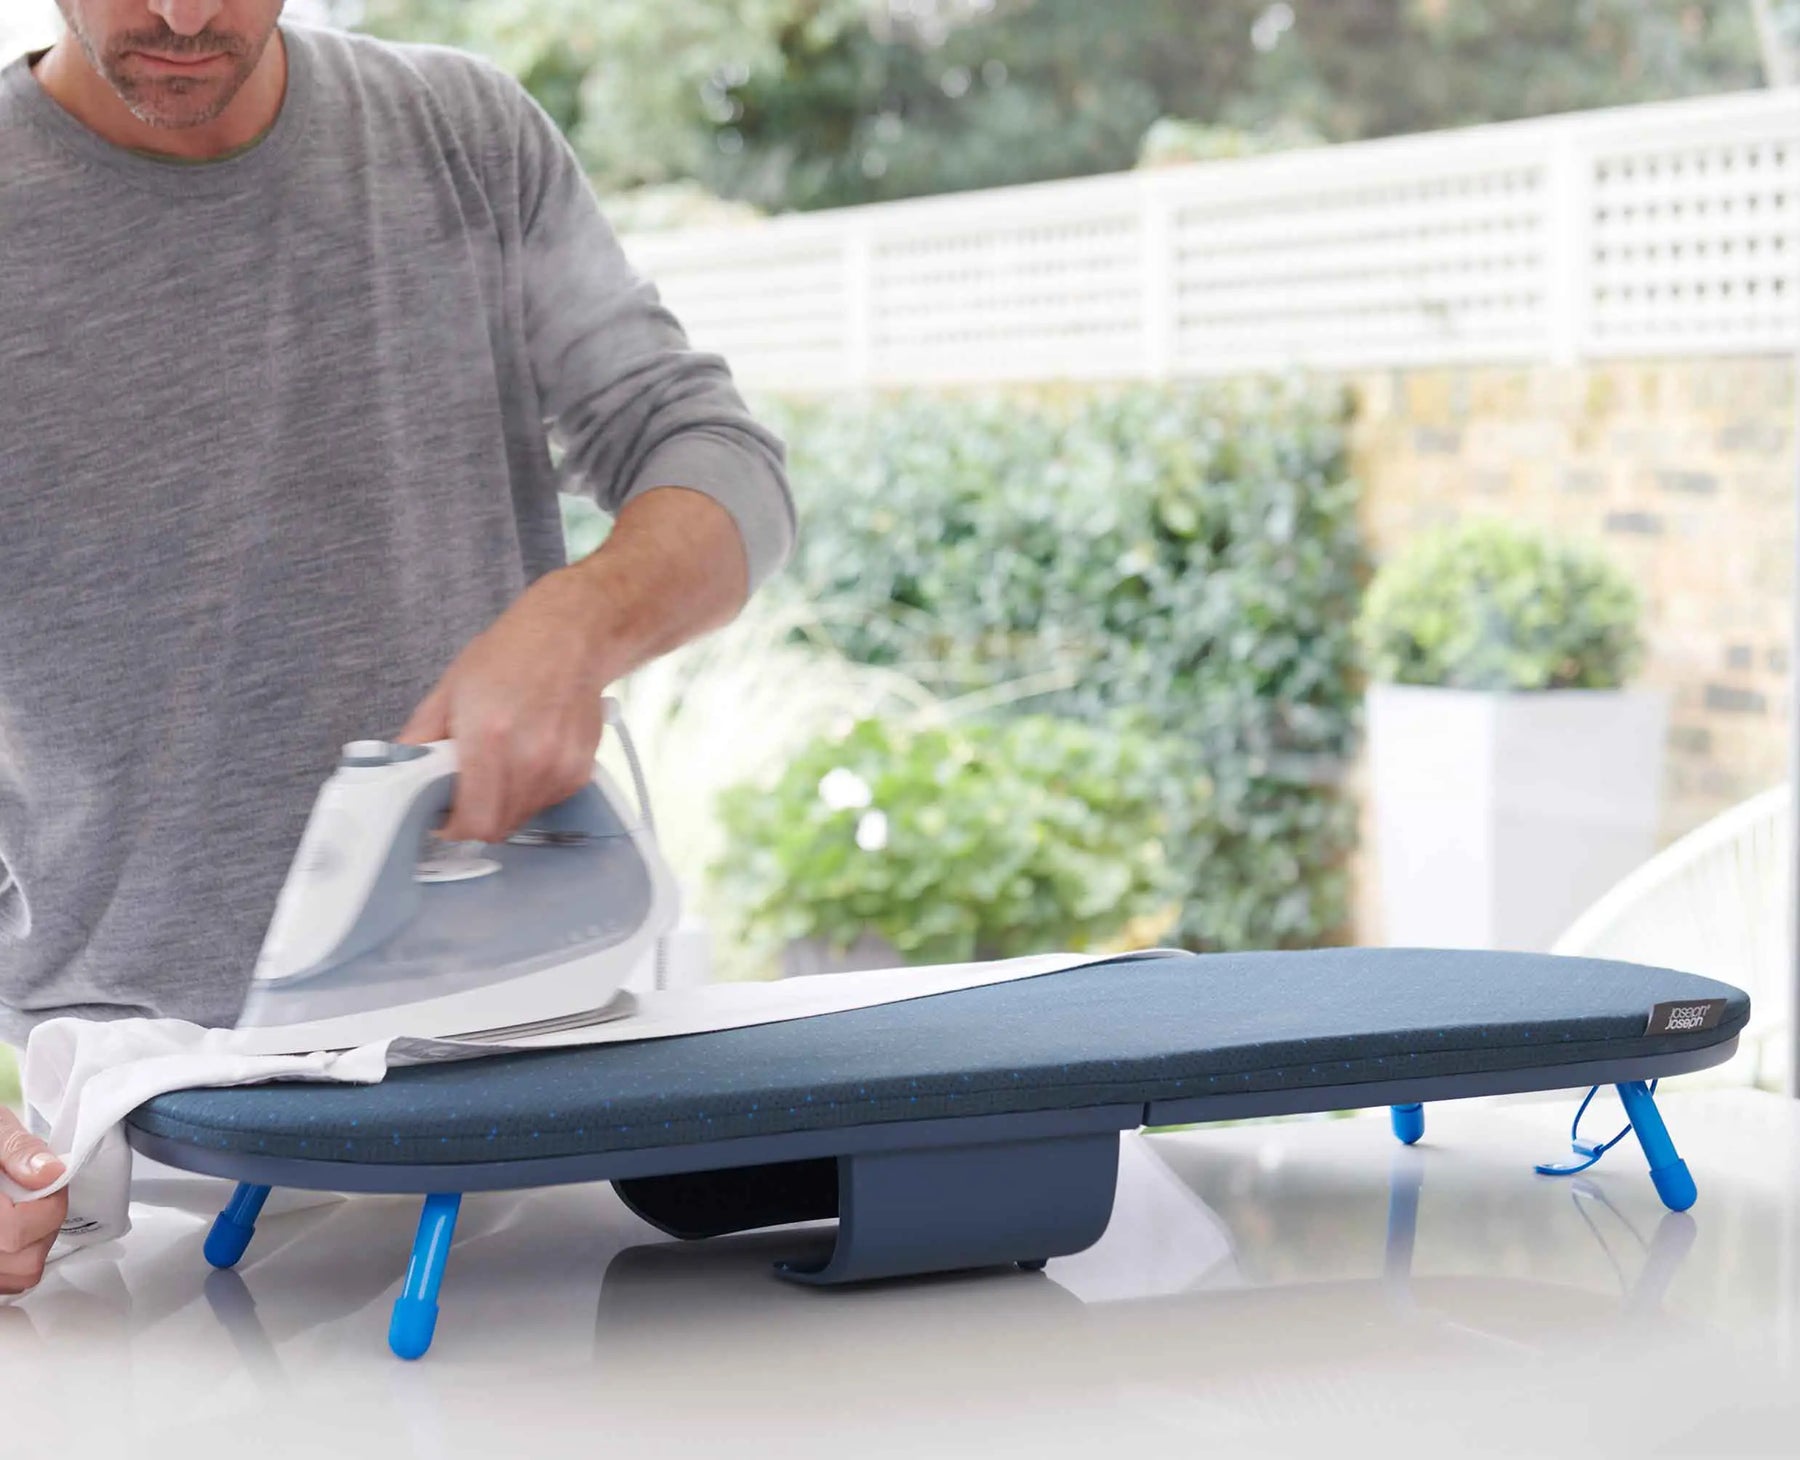 Pocket Plus Folding Ironing Board with Advanced Cover - 50010 - Image 3